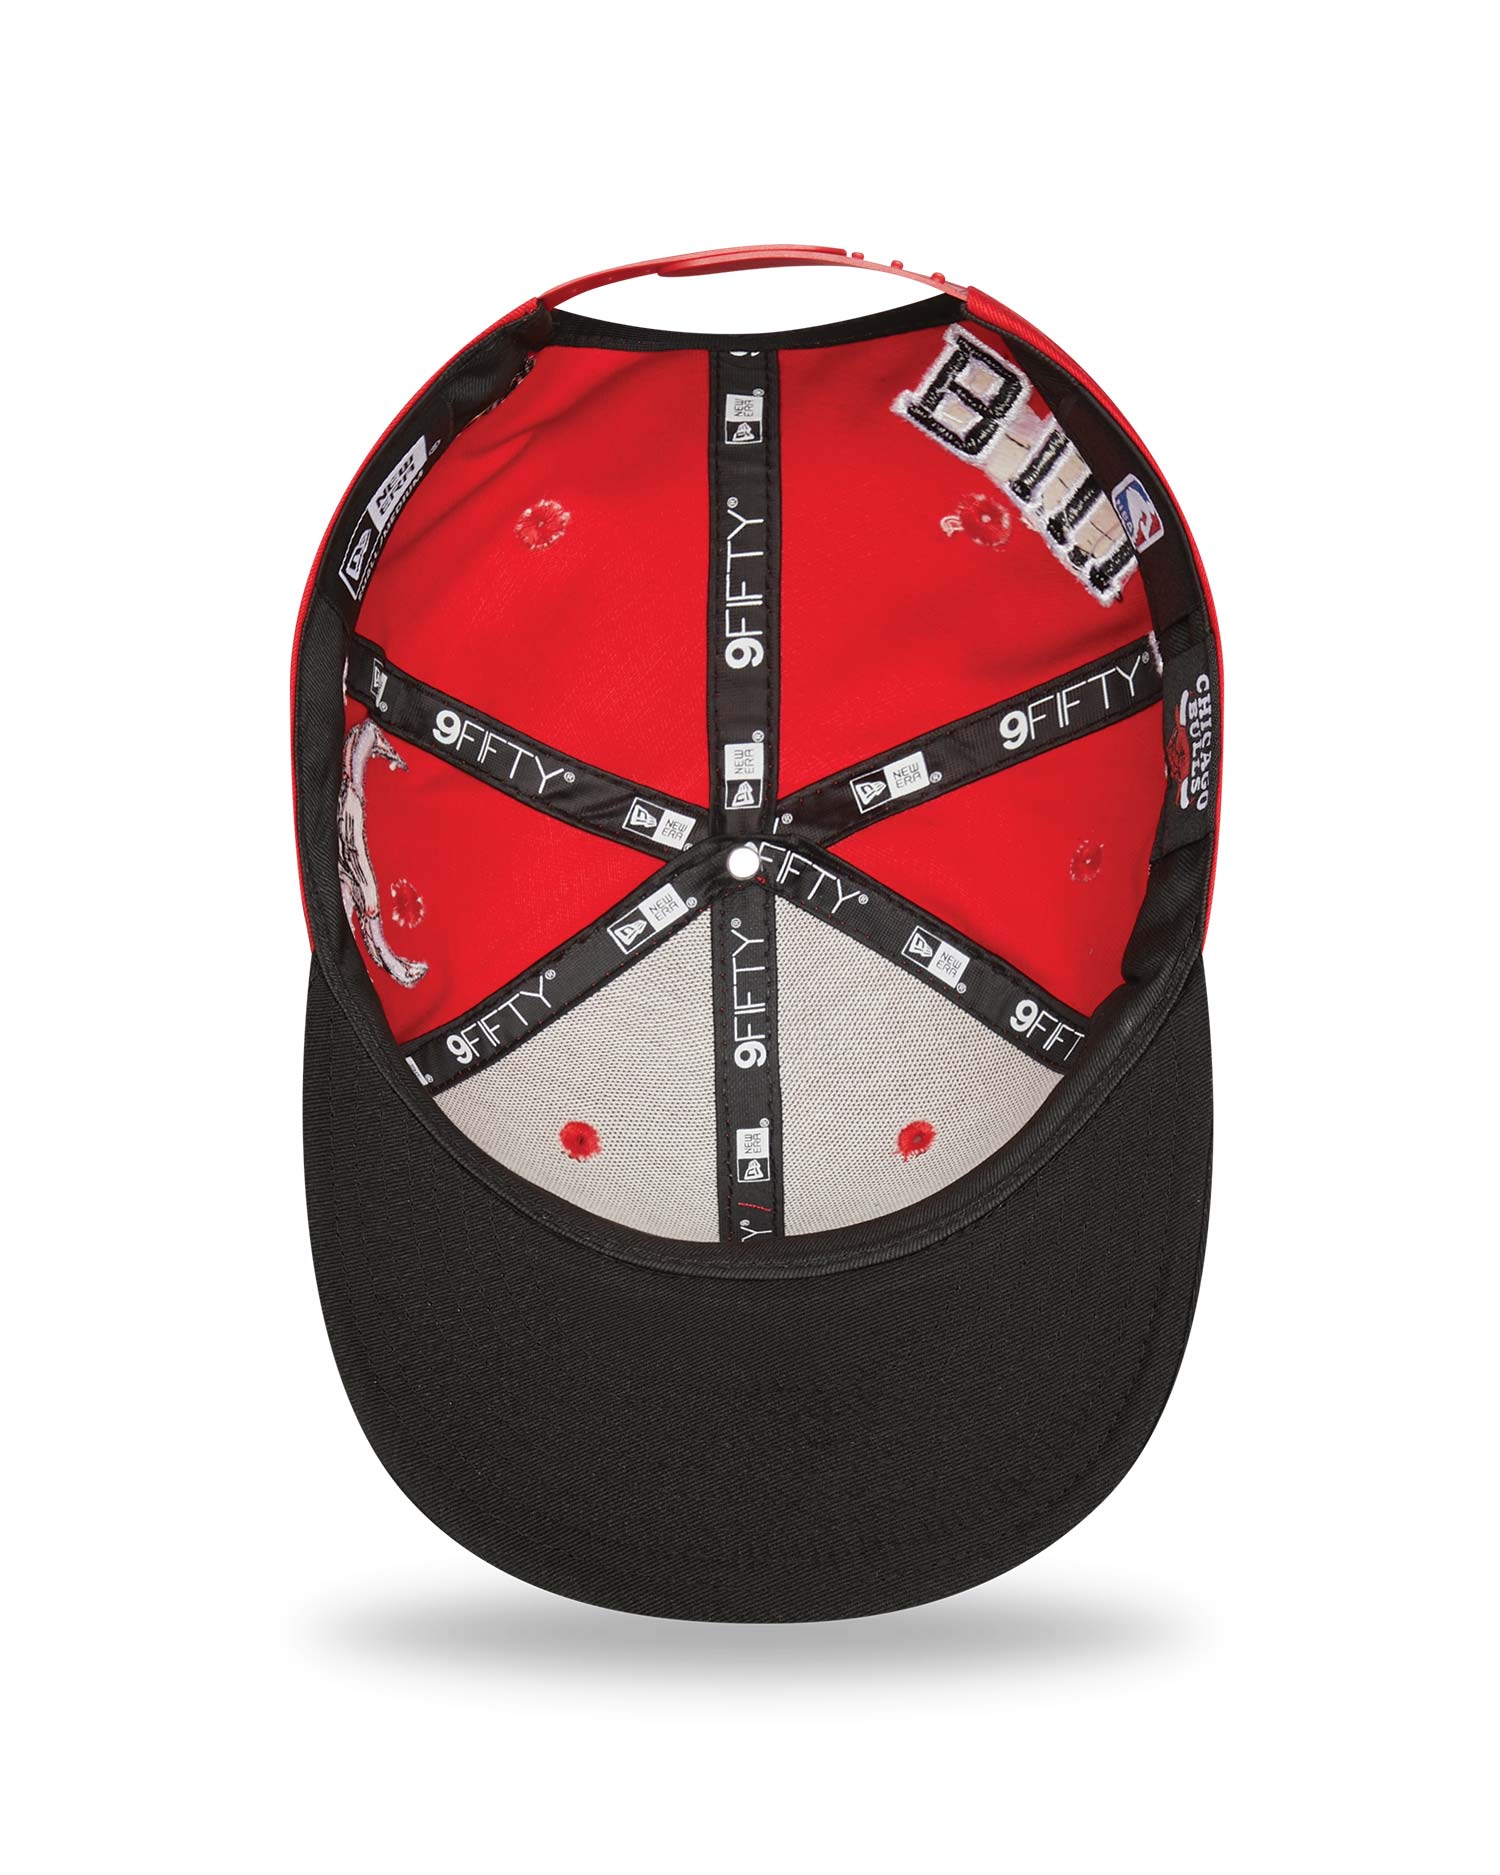 Chicago Bulls All Over Patch Red 9FIFTY Snapback Cap